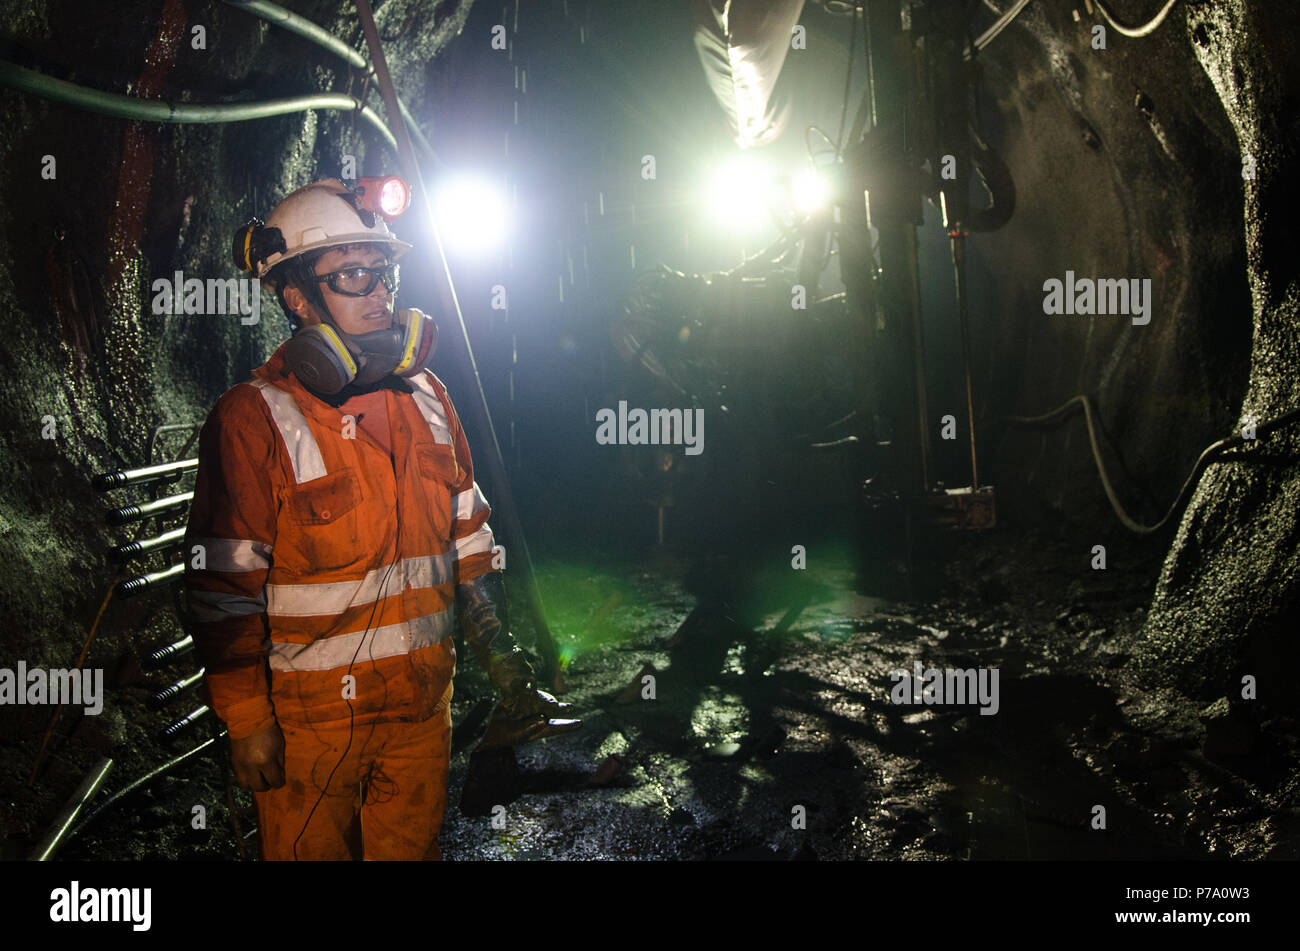 Cerro de Pasco, Peru - July 14th 2017: Miner in the mine. Miner inside the mine well uniformed with a look of confidence. Stock Photo